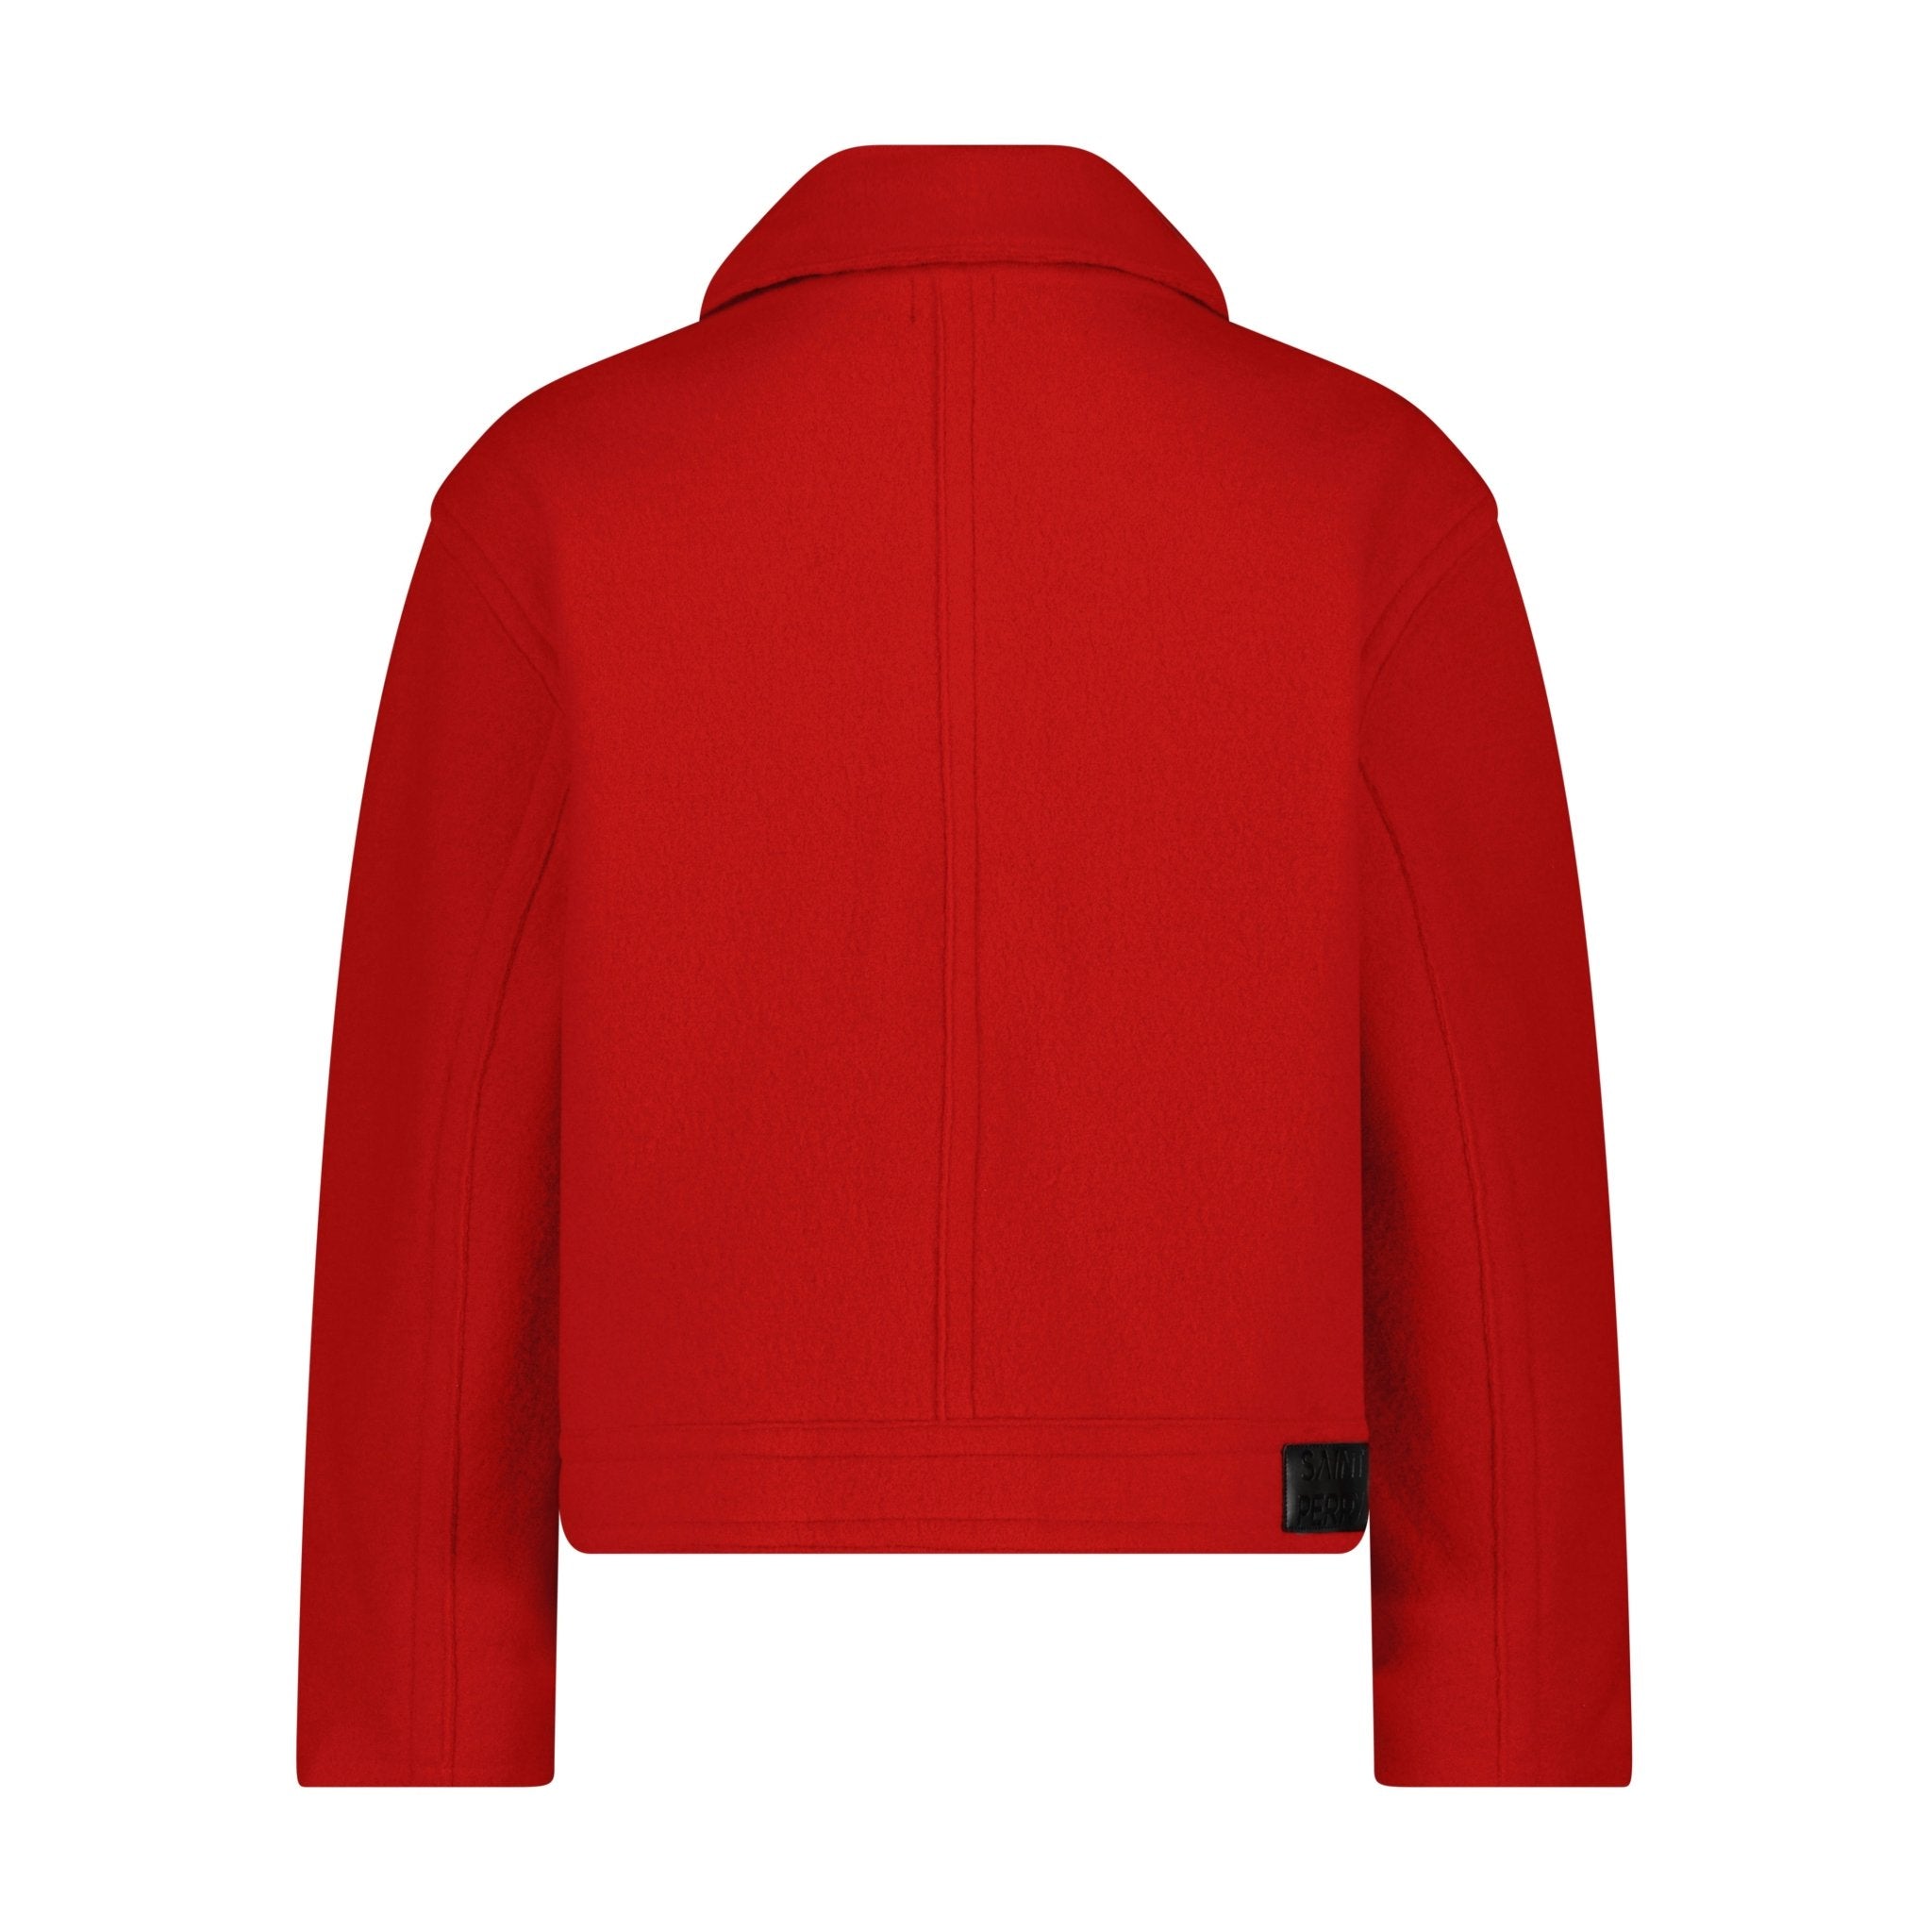 The Red Love Boxy jacket - SAINT PERRY